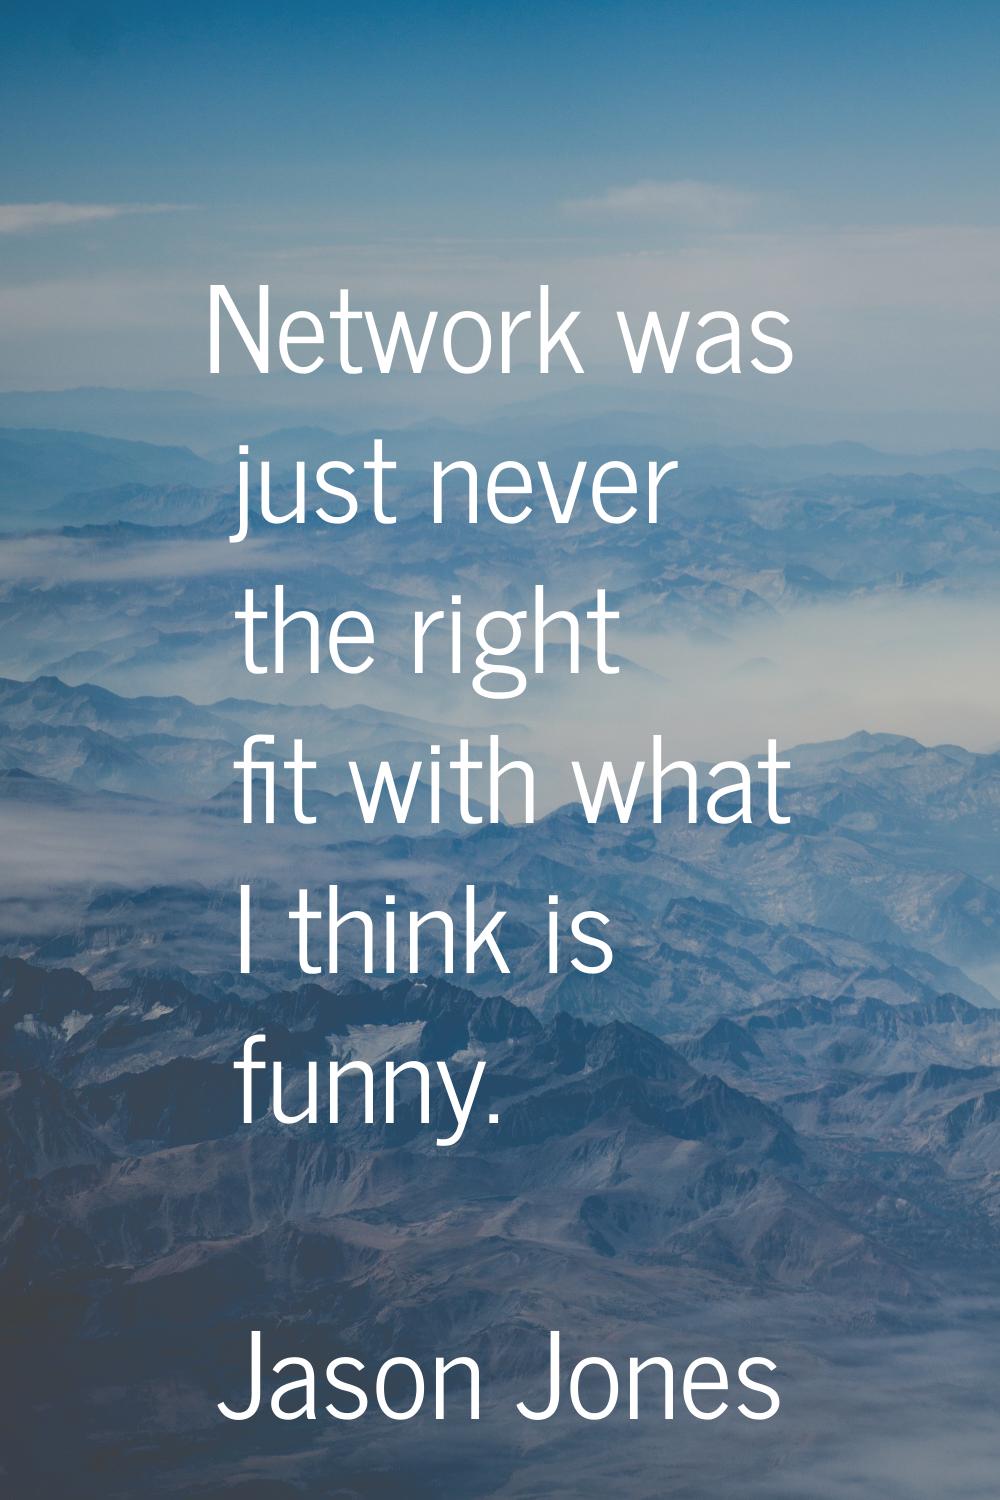 Network was just never the right fit with what I think is funny.